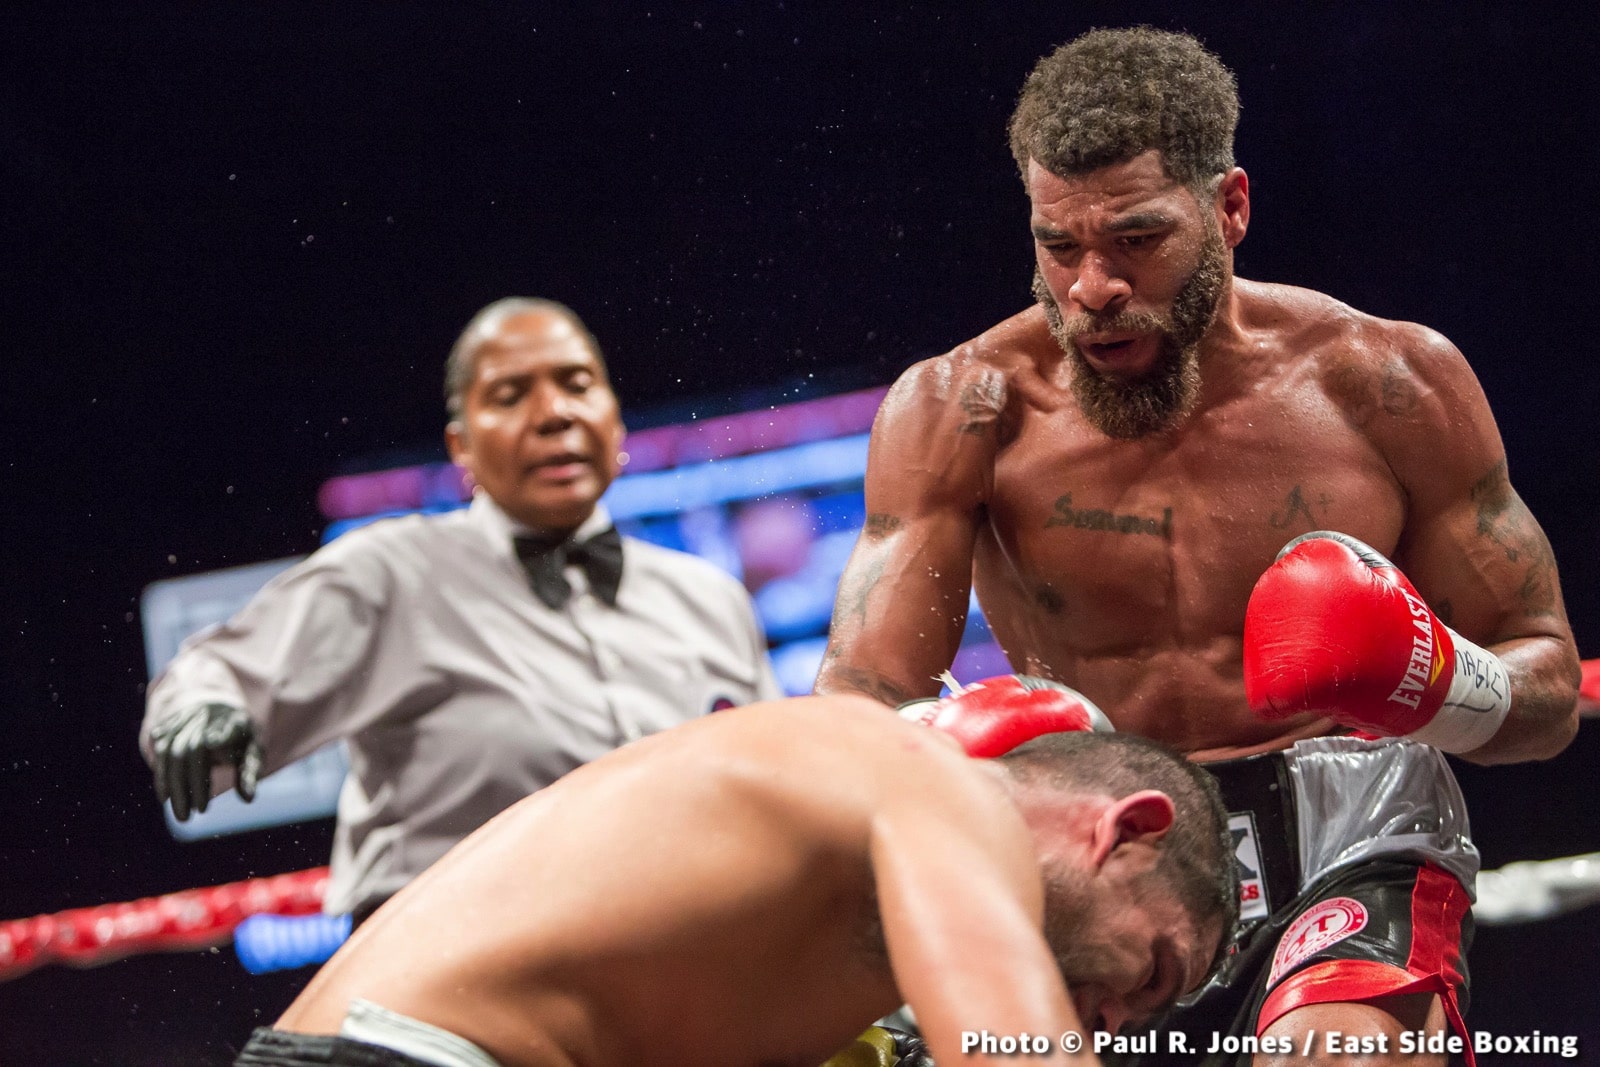 WEEKEND RECAP: Anthony Peterson Wins, Outlaw Suffers Setback. Here’s What It Means in 3 Takeaways — Prograis, Taylor, Catterall, More!